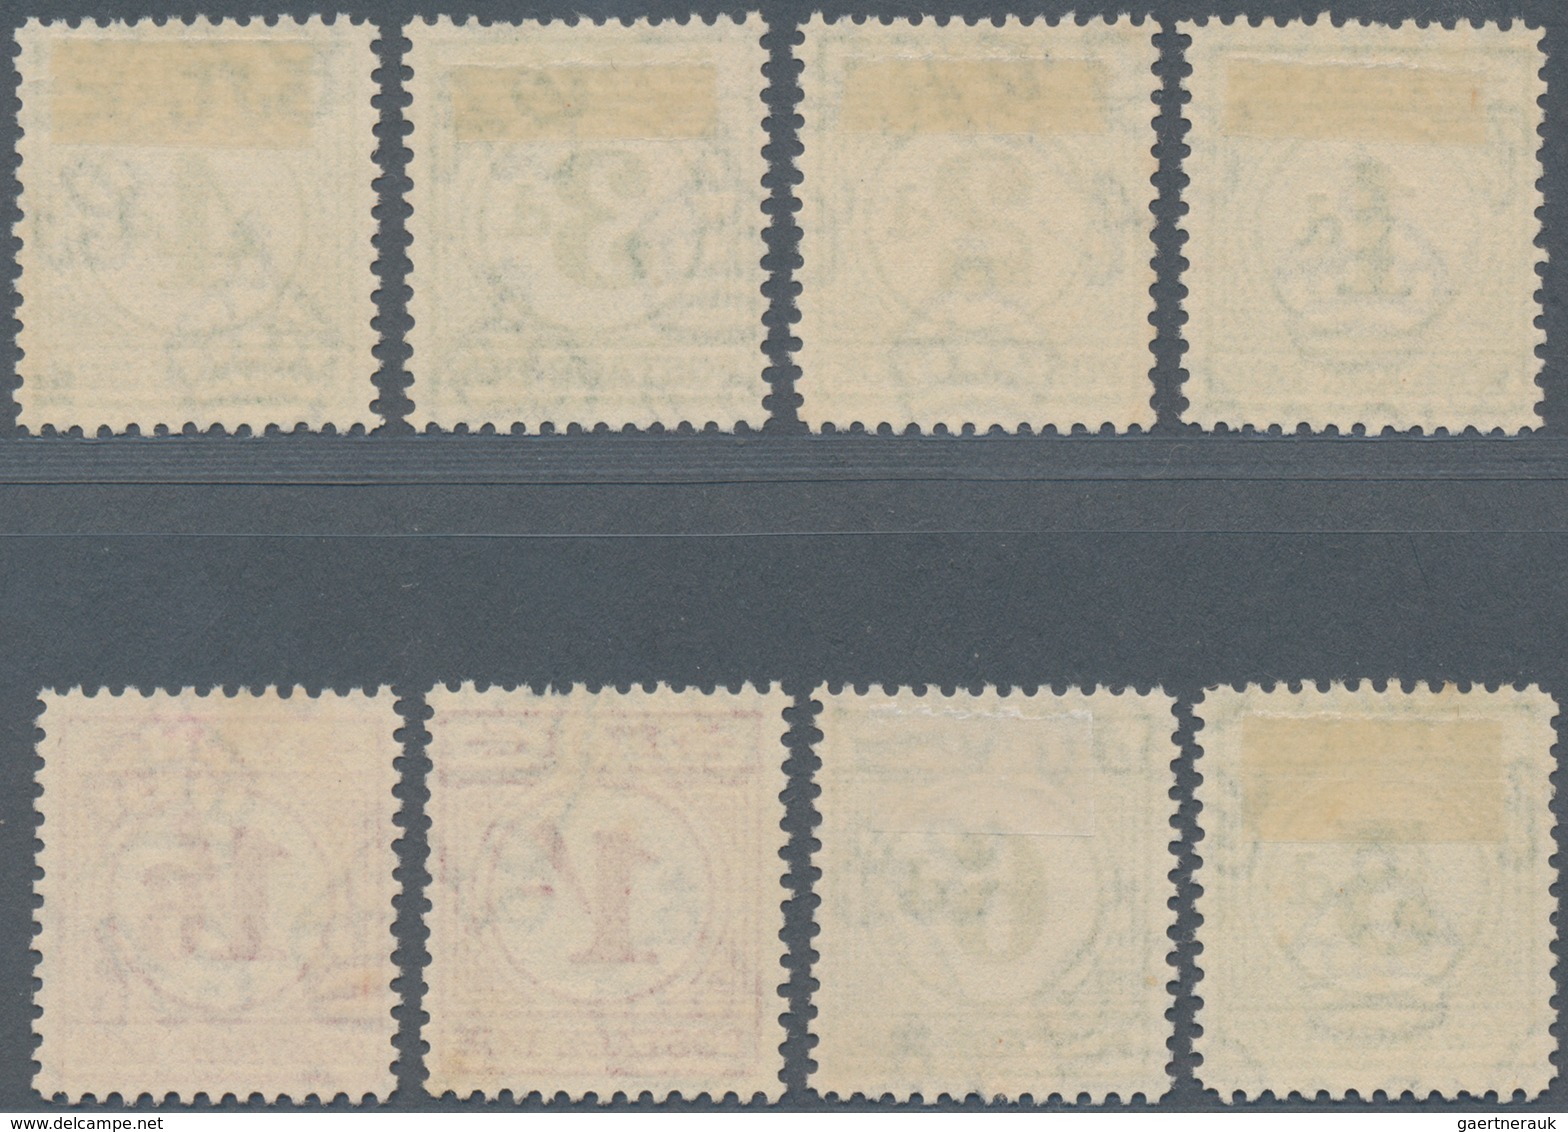 Fiji-Inseln - Portomarken: 1940 Complete Set Of 8 Postage Dues Up To 1s6d., Cancelled By Part FIJI C - Fiji (1970-...)